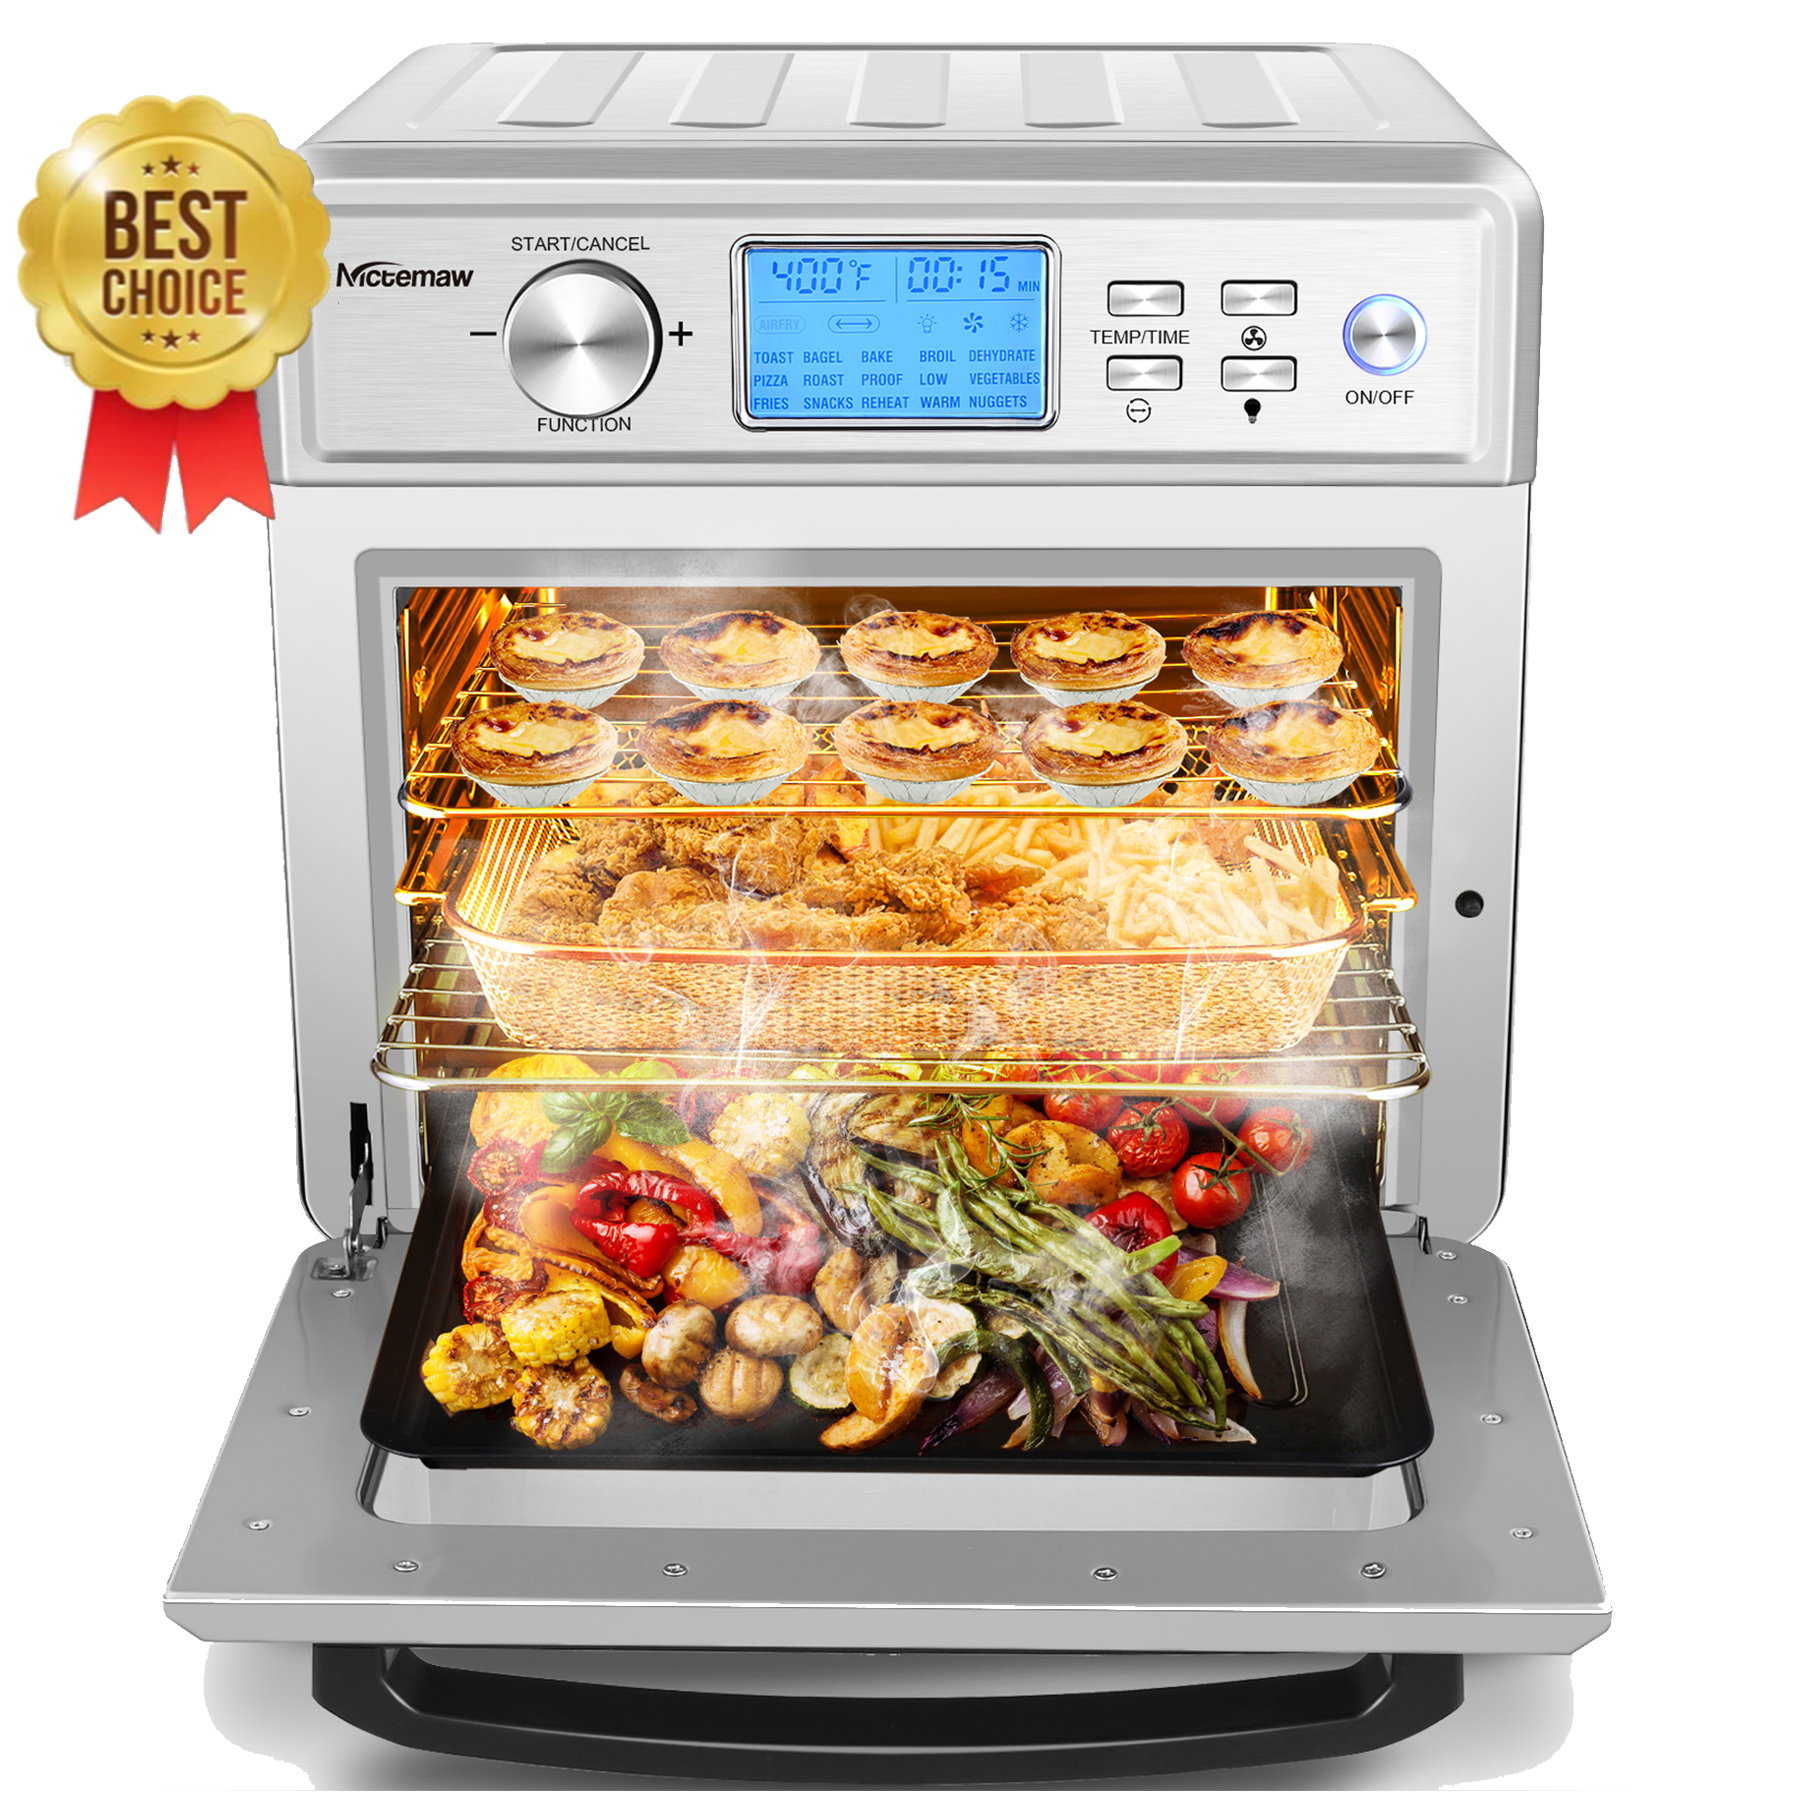 Nictemaw 24.5QT Air Fryer, 16-in-1 Air Fryer Oven, 1700W Electric Air Fryer Toaster Oven, Presets for Baking, with LED Display & Temperature/Time Dial, Roaster, Broiler, Rotisserie - image 5 of 11